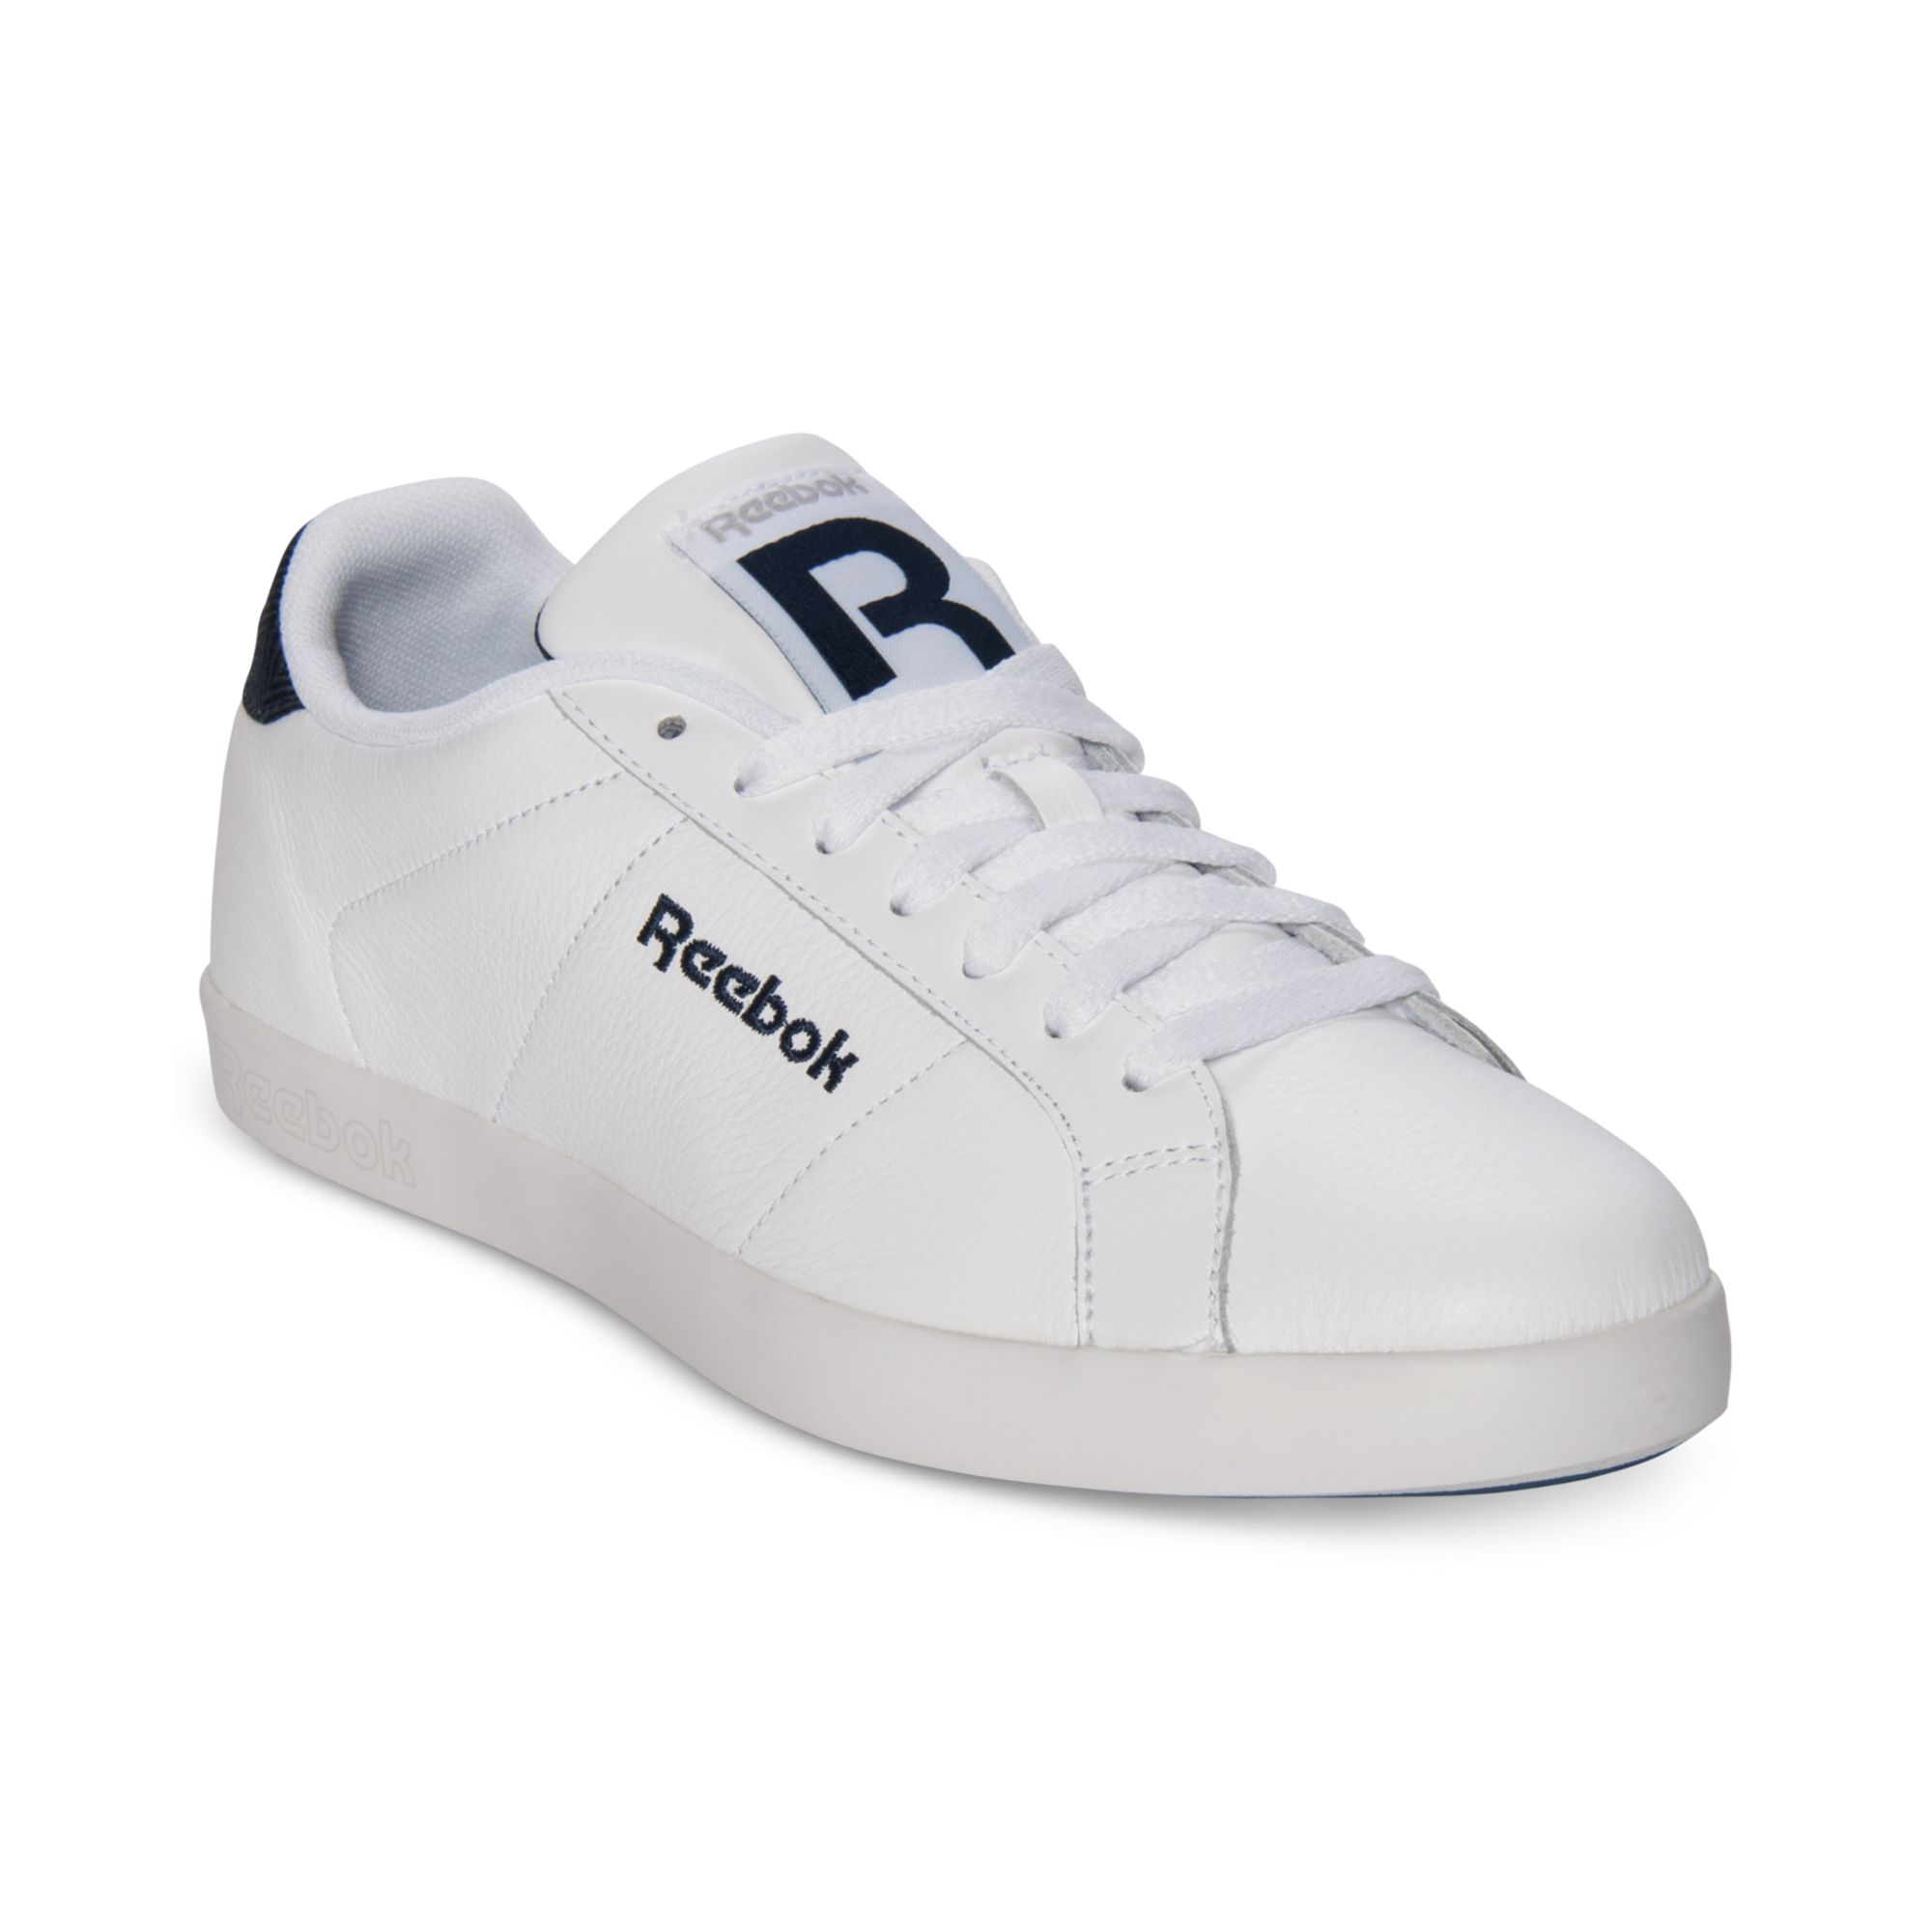 reebok white shoes for men Online Shopping for Women, Men, Kids Fashion &  Lifestyle|Free Delivery & Returns! -